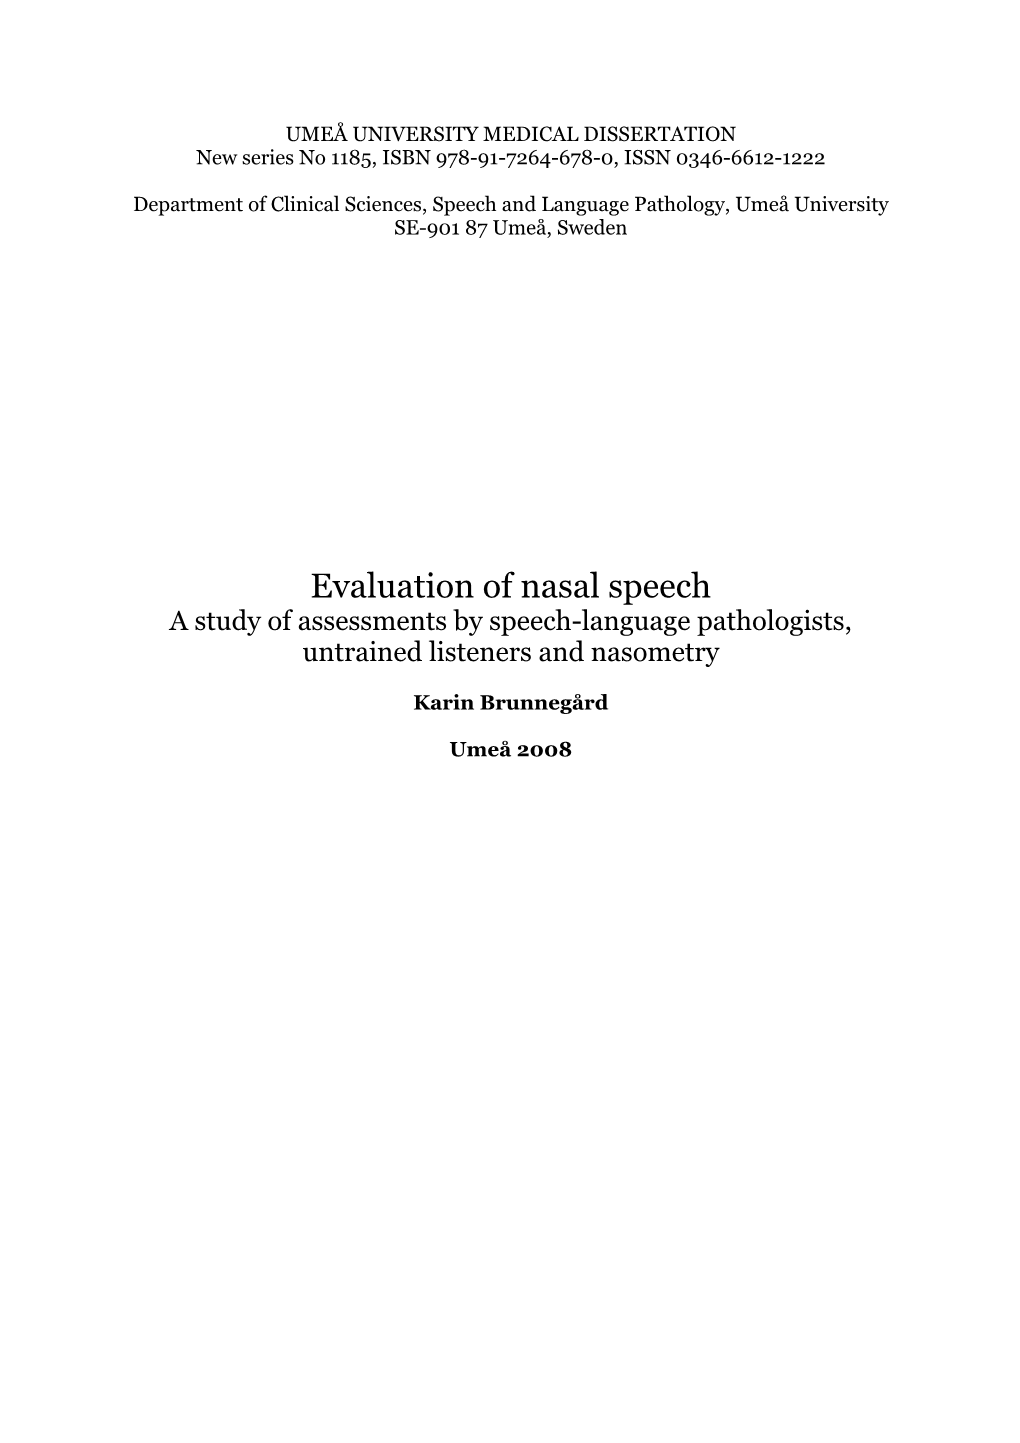 Evaluation of Nasal Speech a Study of Assessments by Speech-Language Pathologists, Untrained Listeners and Nasometry